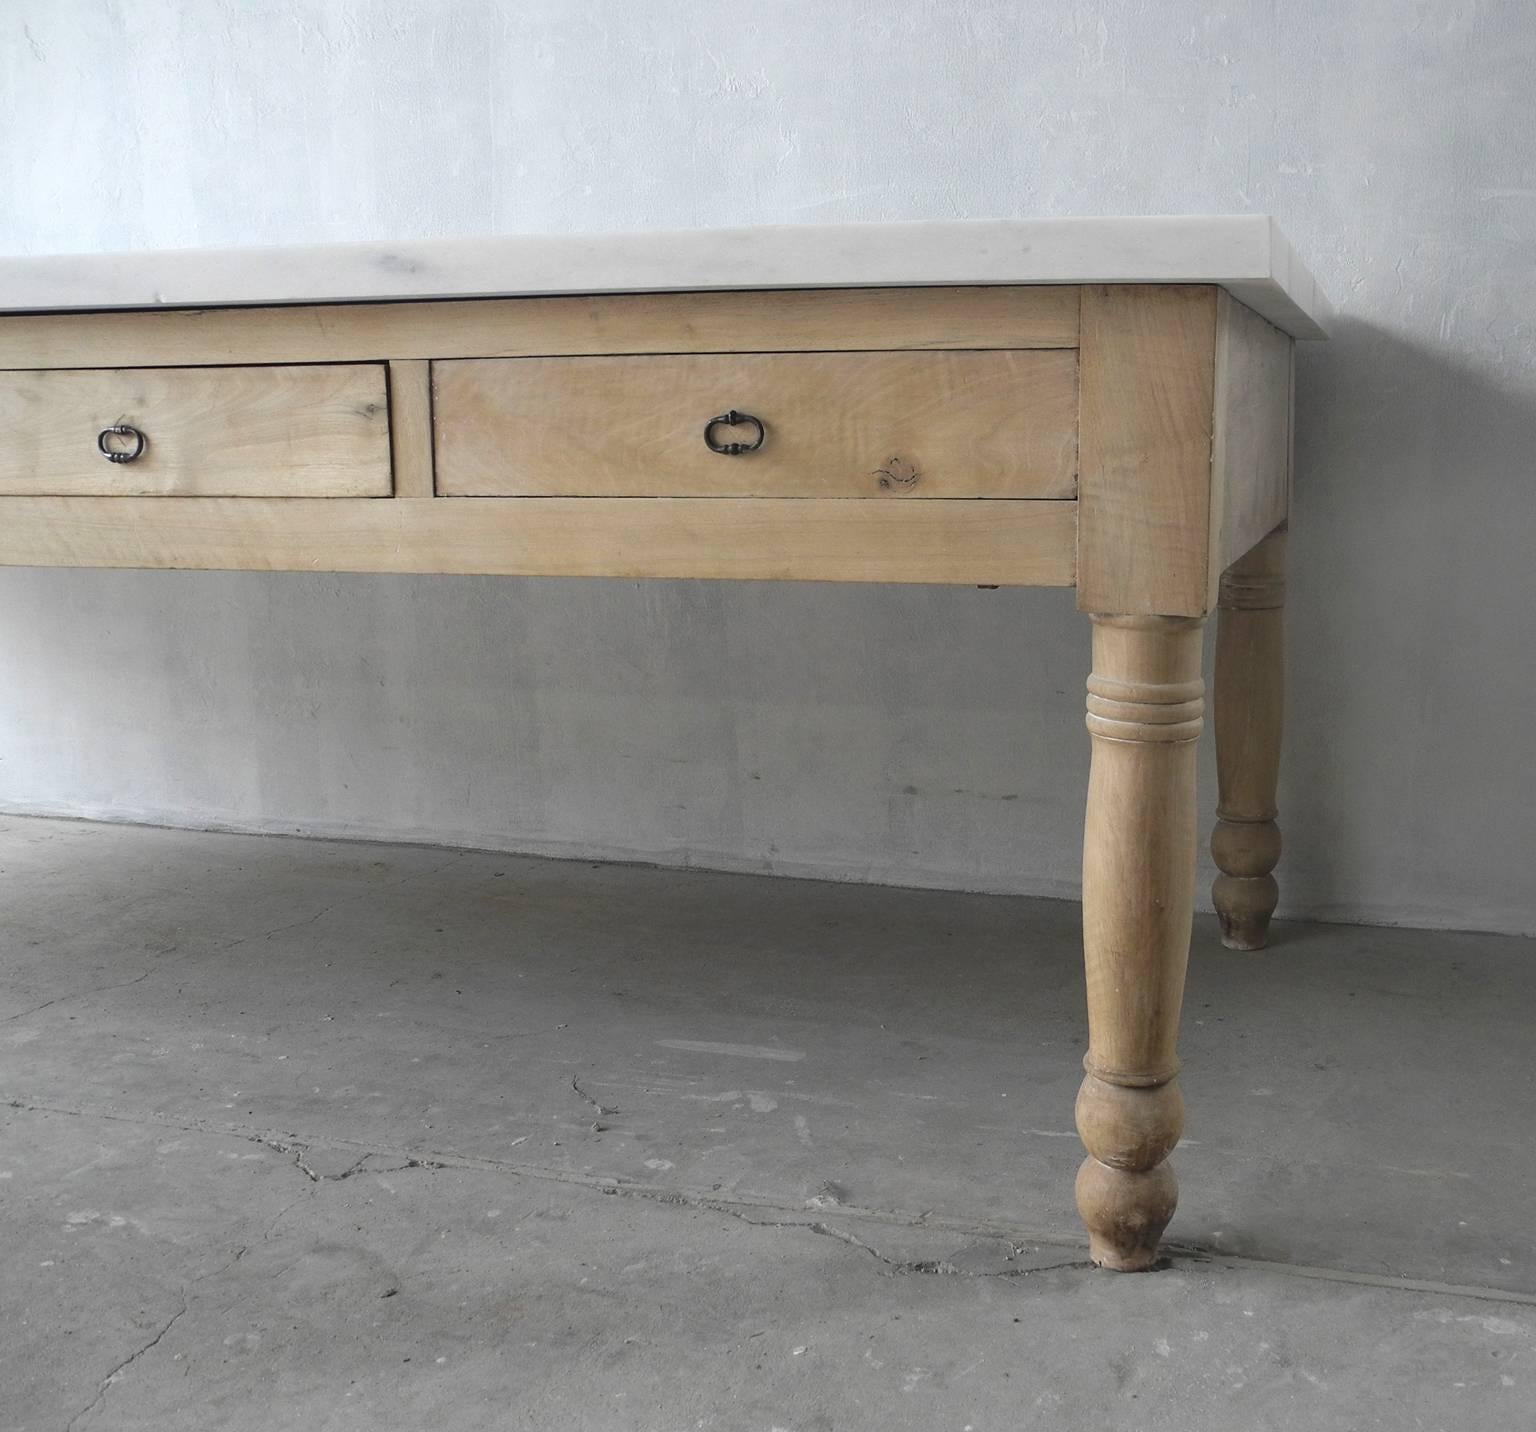 This is a grand and wonderful antique walnut table base with carved legs and drawers. It is from the late 19th century. It boasts a beautiful natural finish and reclaimed antique iron hardware. It also has a fabulous white marble top made from our